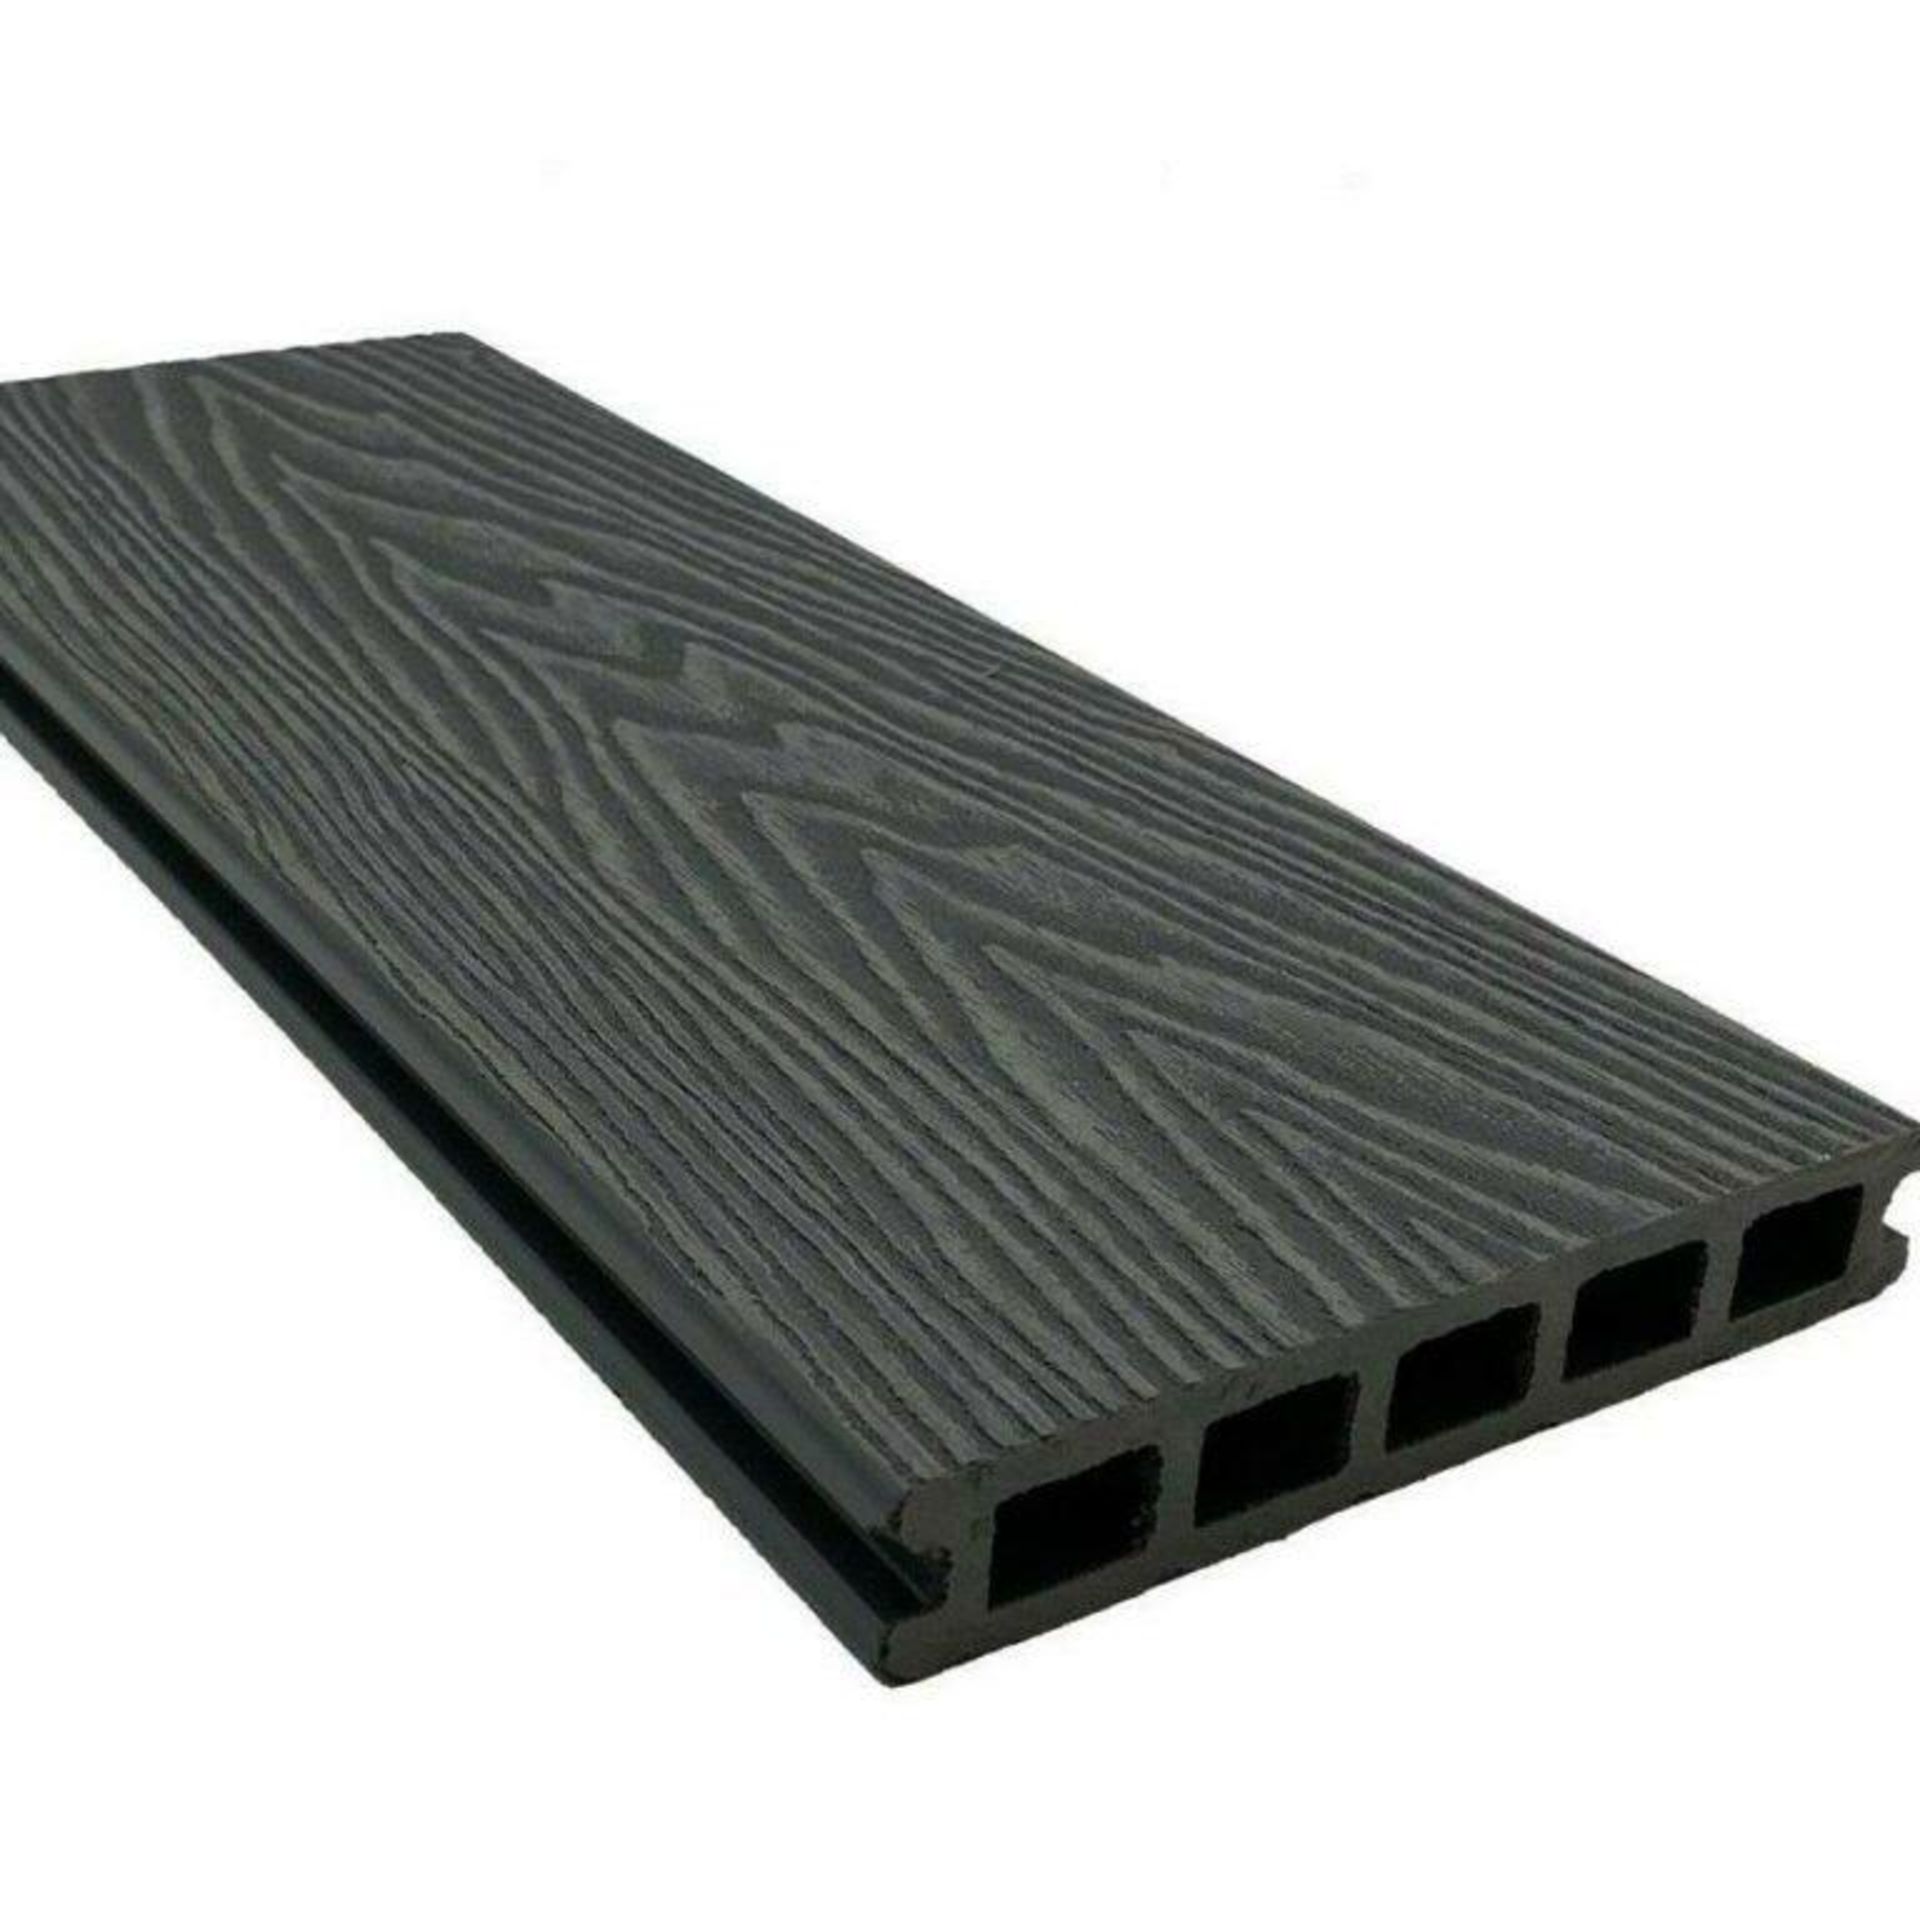 10 x Composite Decking boards inc fixings colour Ash Grey - Image 2 of 4